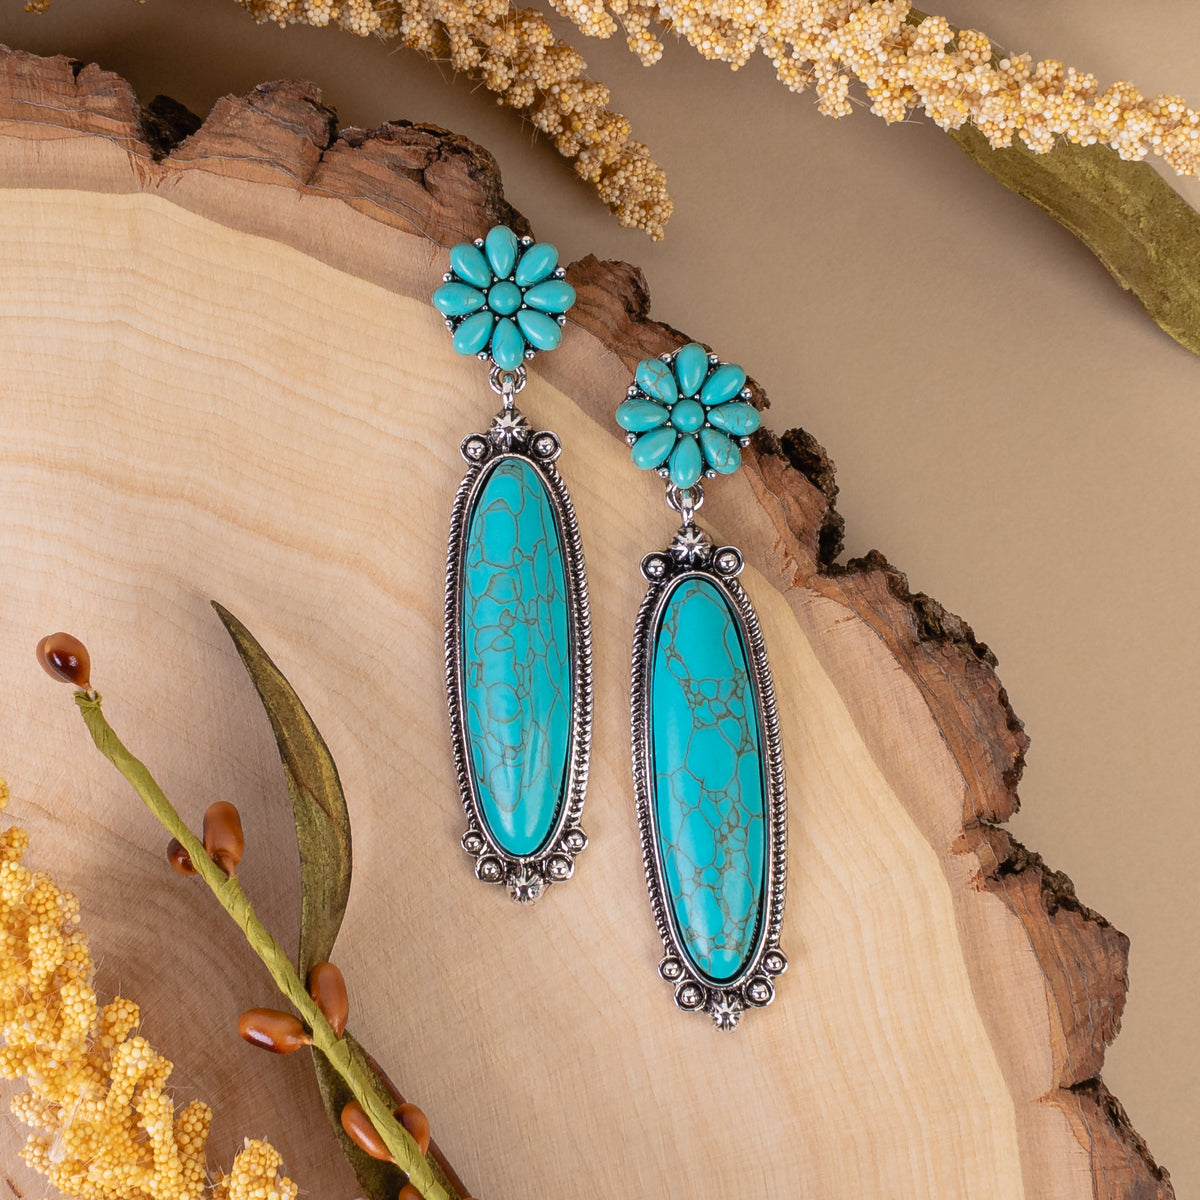 93135 - Squash Blossom Earrings - Turquoise & Silver